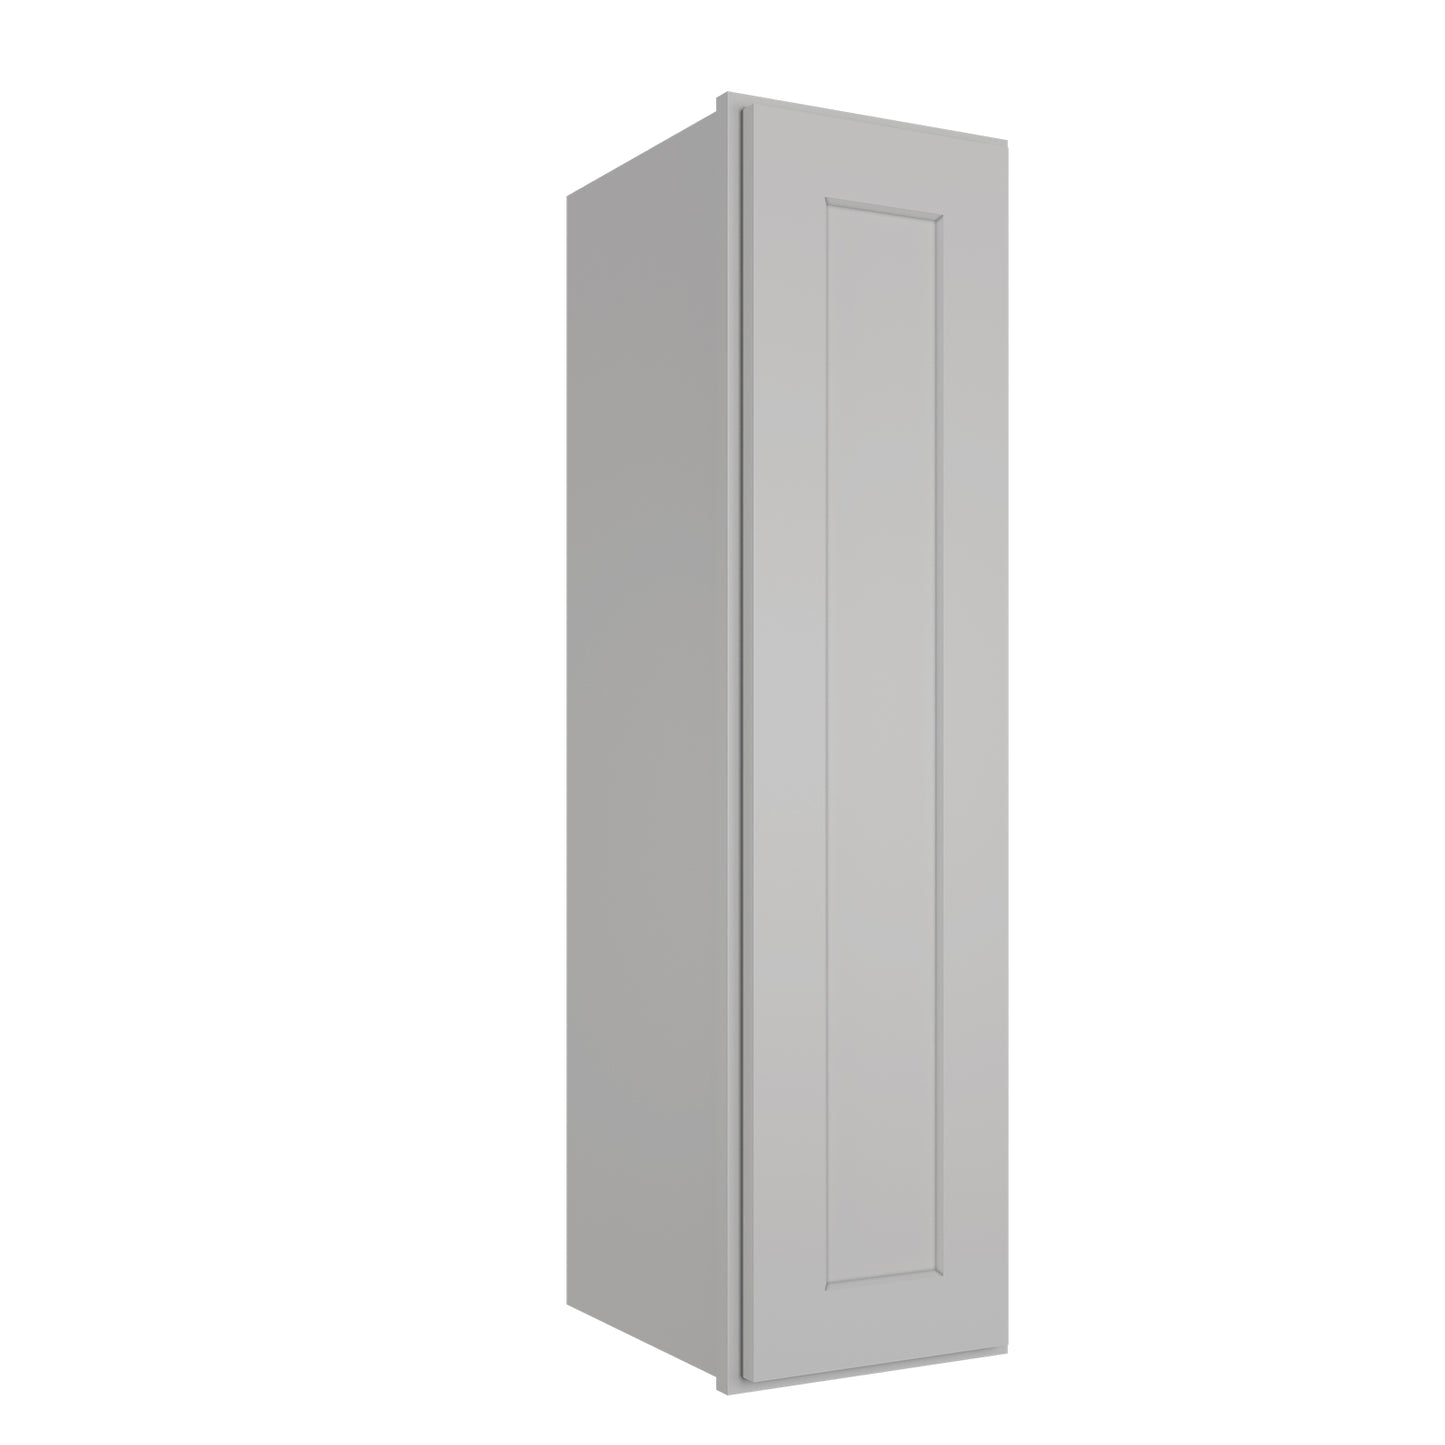 Medicine Cabinet Wall Mounted W0930